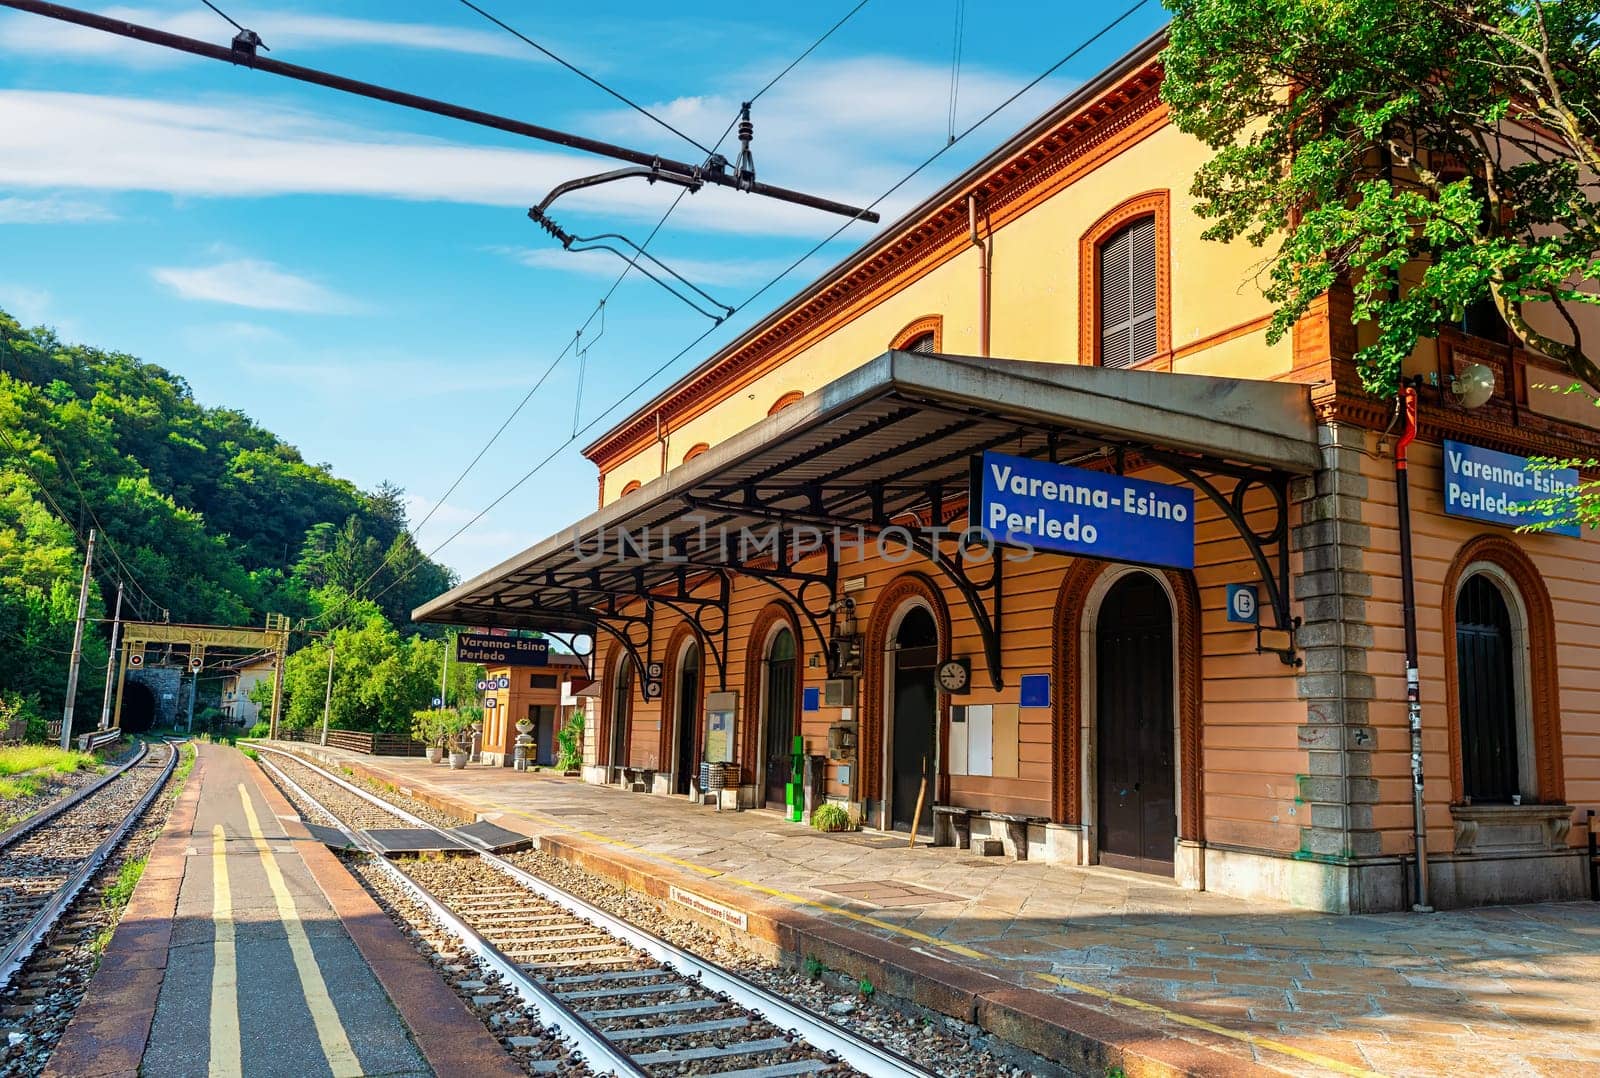 View of the platforms of Varenna-Esino Porledo railway station at Perledo, on the Tirano–Lecco railway in Lombardy, in northern Italy